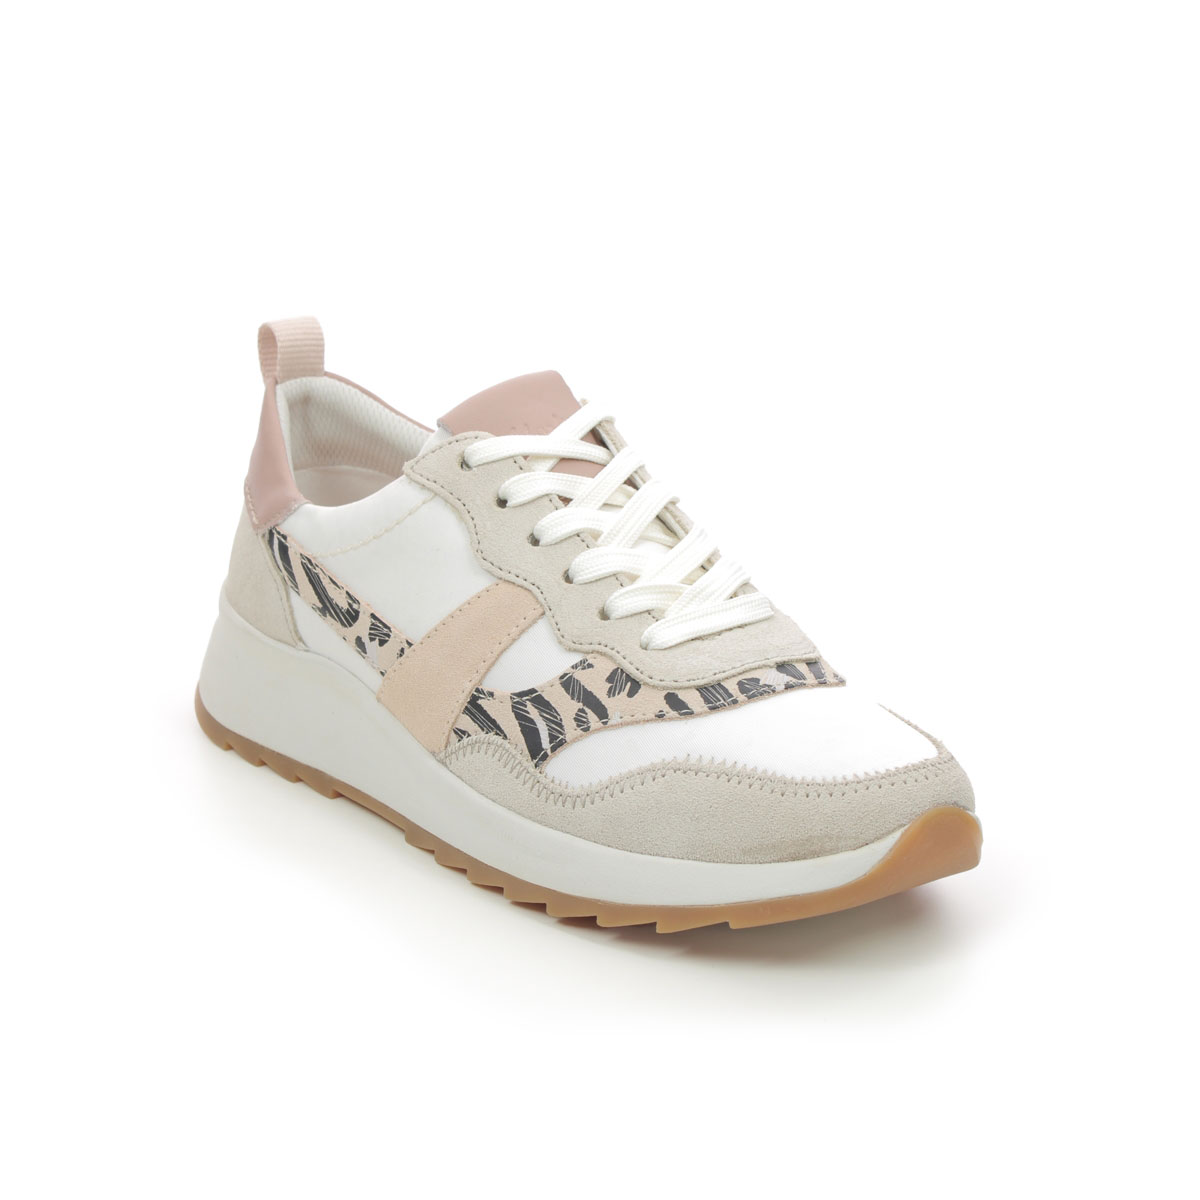 Clarks Dashlite Jazz White Pink Womens Trainers 704294D In Size 8 In Plain White Pink